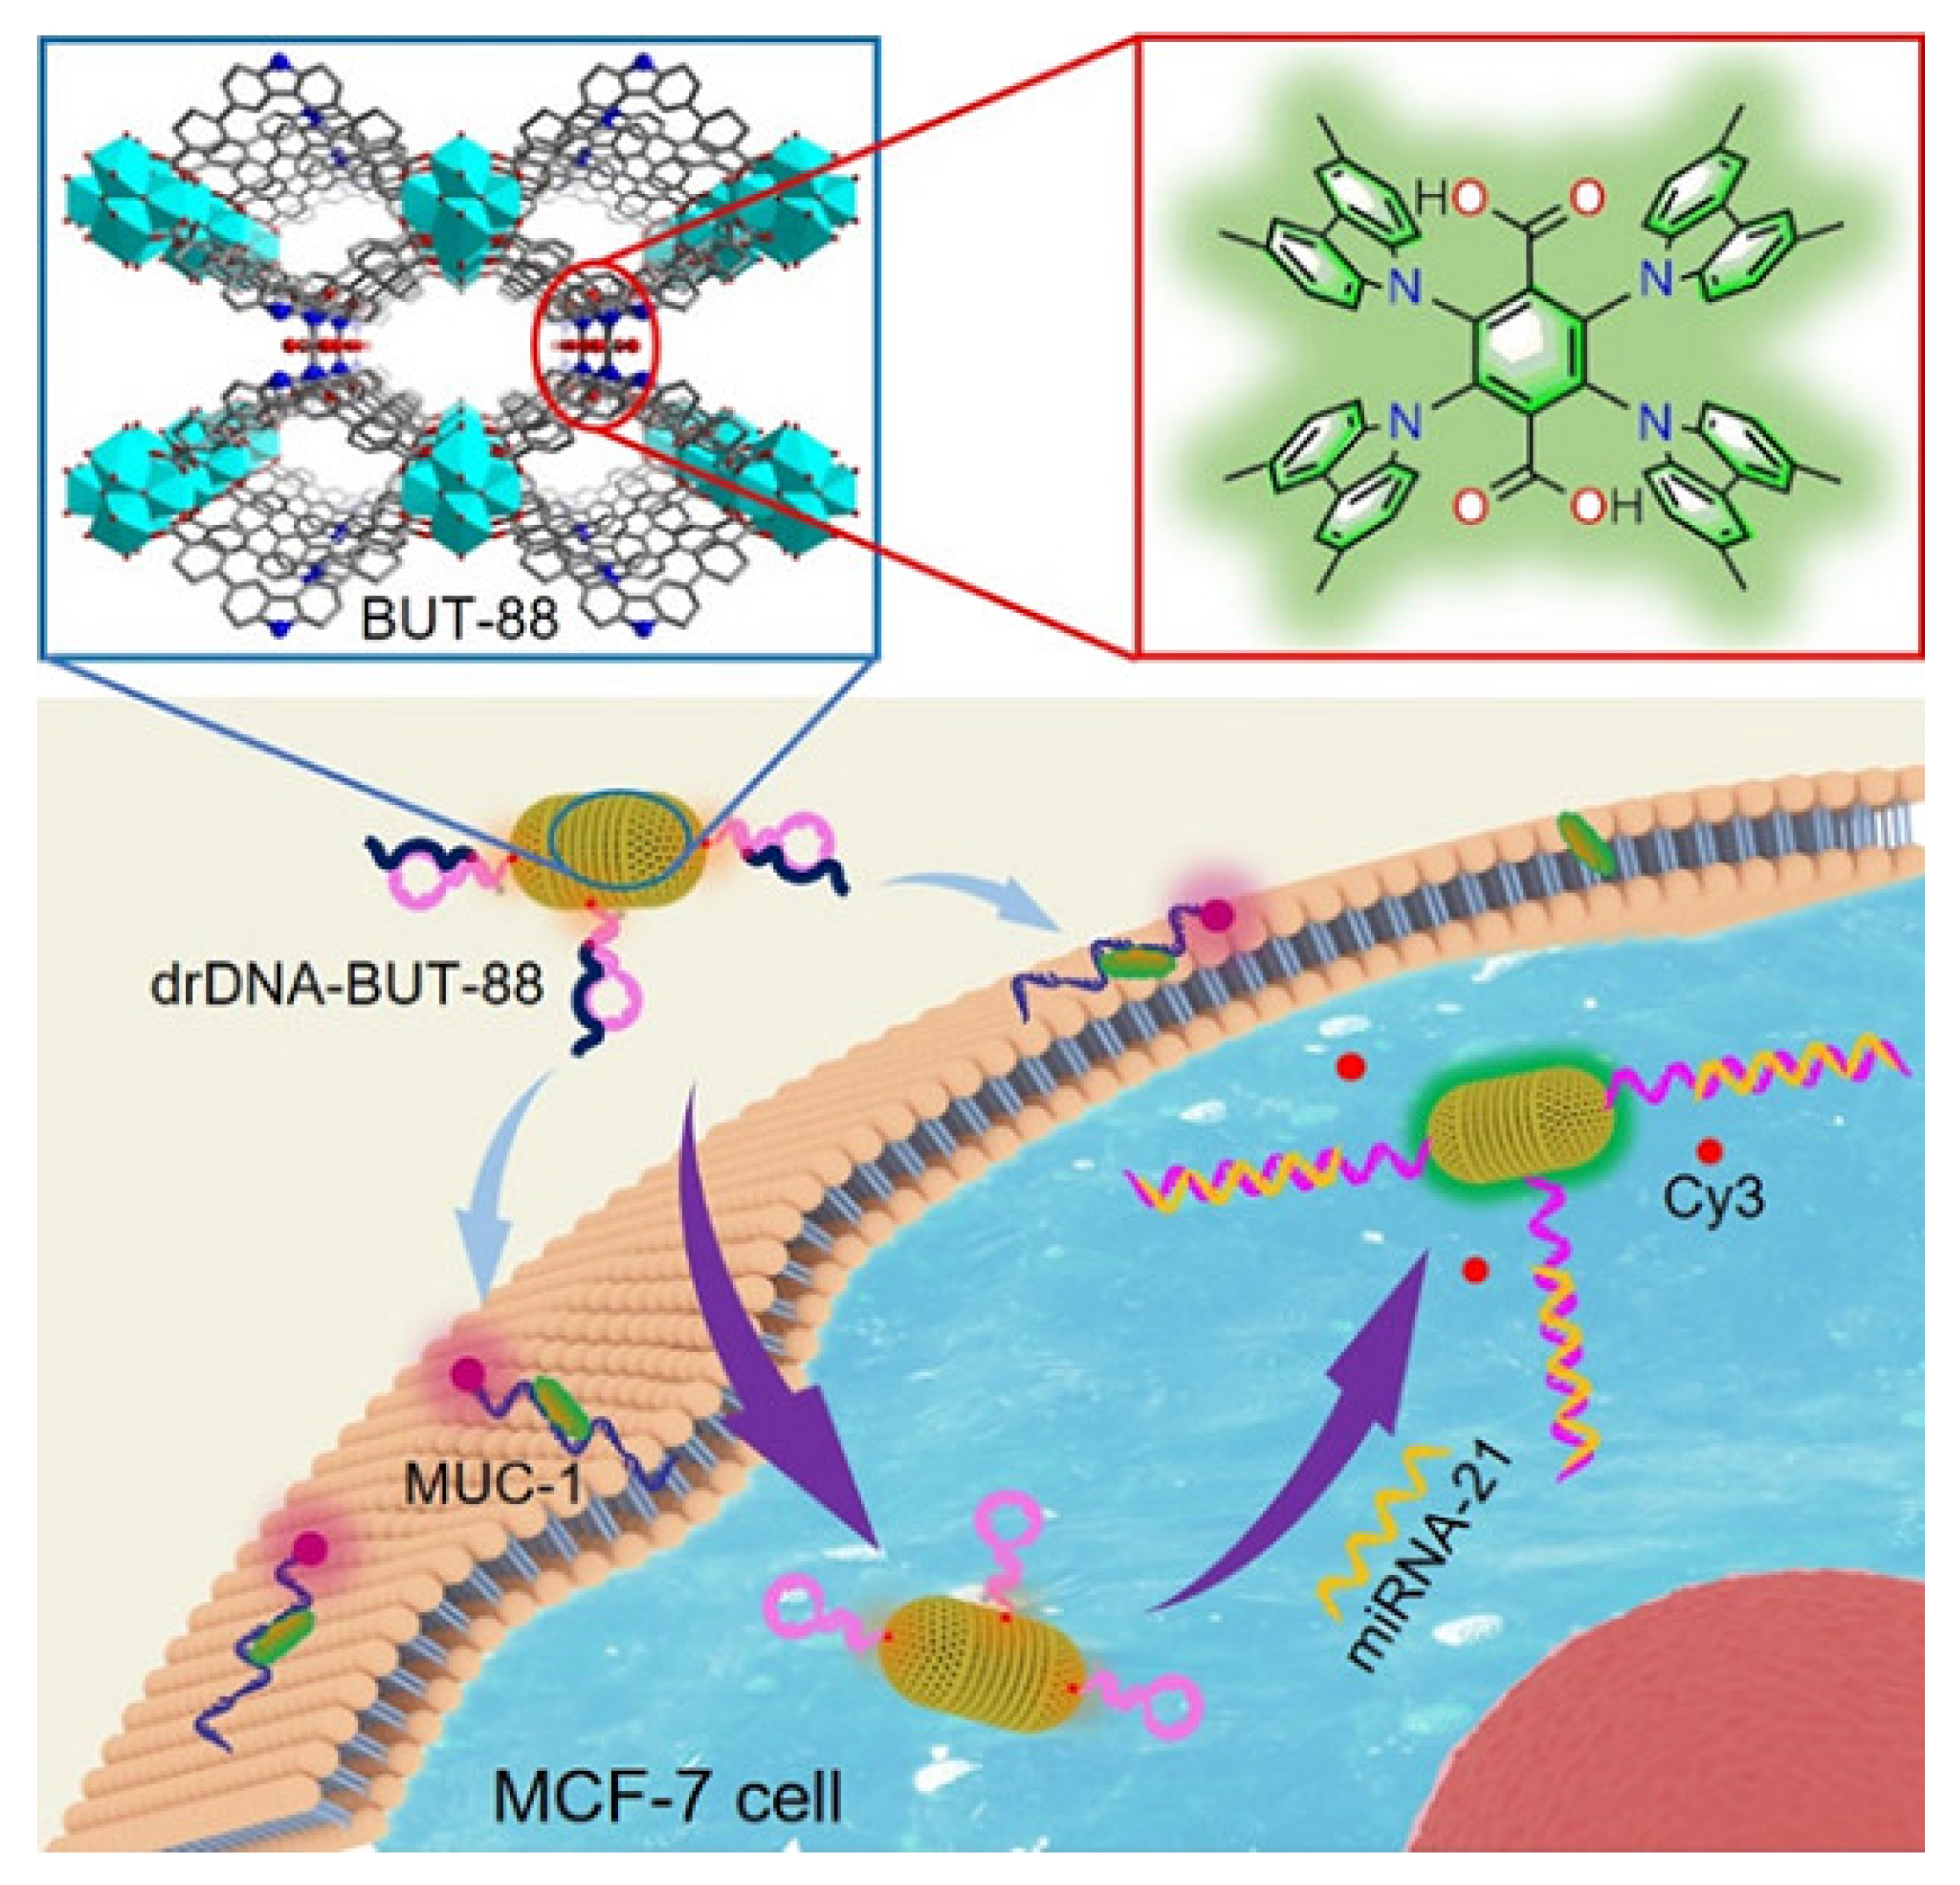 Bimetallic Metal–Organic Framework Fe/Co-MIL-88(NH2) Exhibiting High  Peroxidase-like Activity and Its Application in Detection of Extracellular  Vesicles